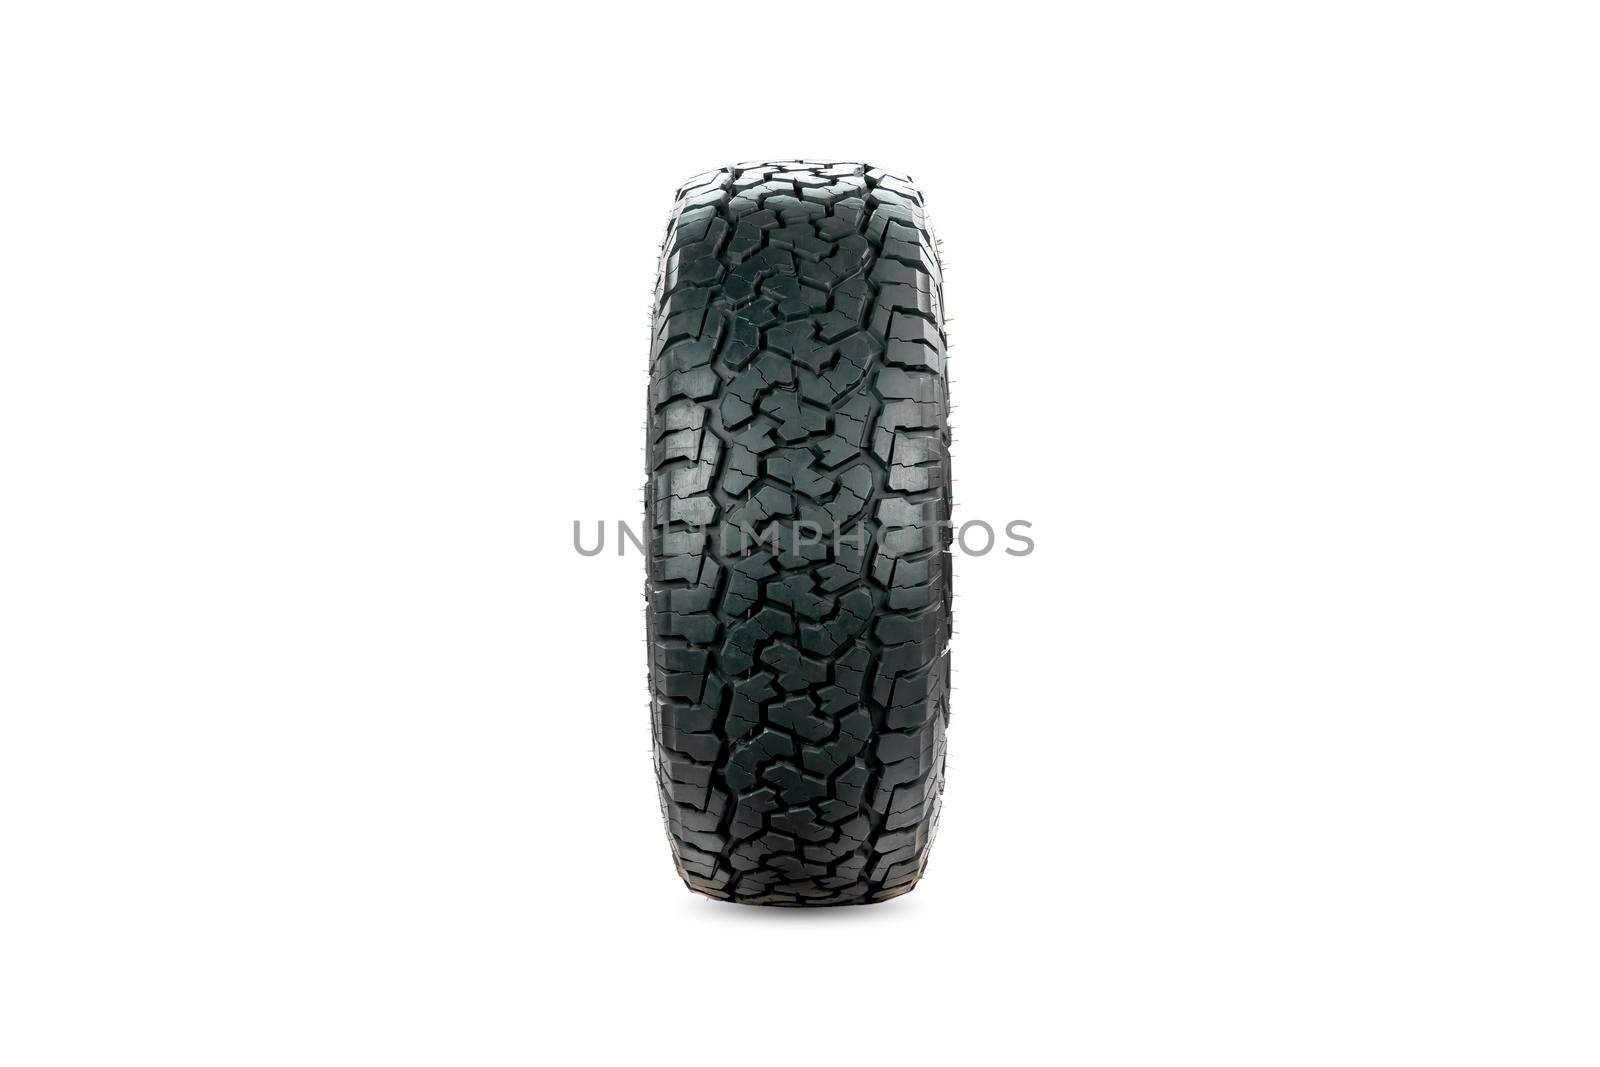 Front view of an all terrain tire designed for use in all road conditions isolated on white background. by wattanaphob